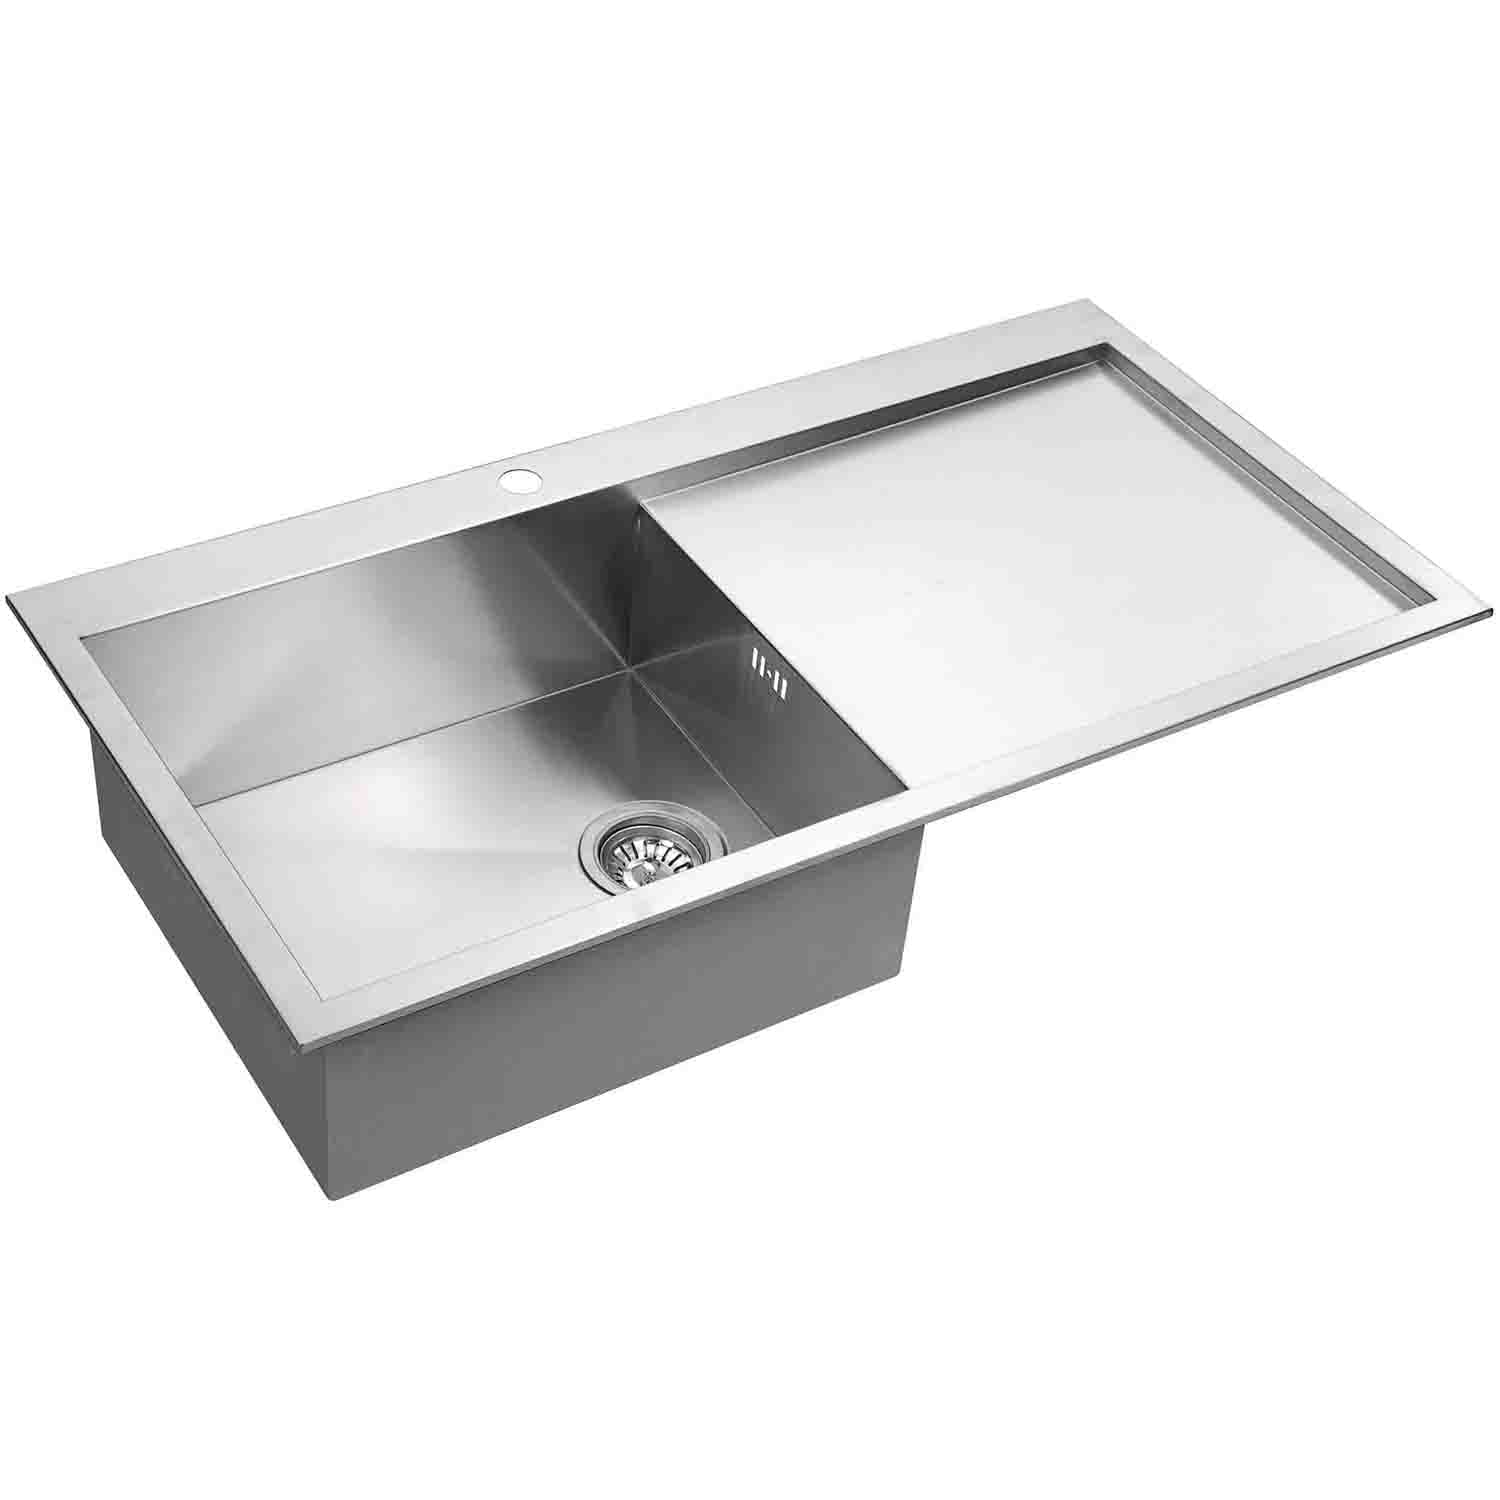 DAX Handmade Single Bowl Top Mount Kitchen Sink with Draining Board, 18 Gauge Stainless Steel, Brushed Finish, 40 x 20 x 8 Inches (DAX-AT100SP)